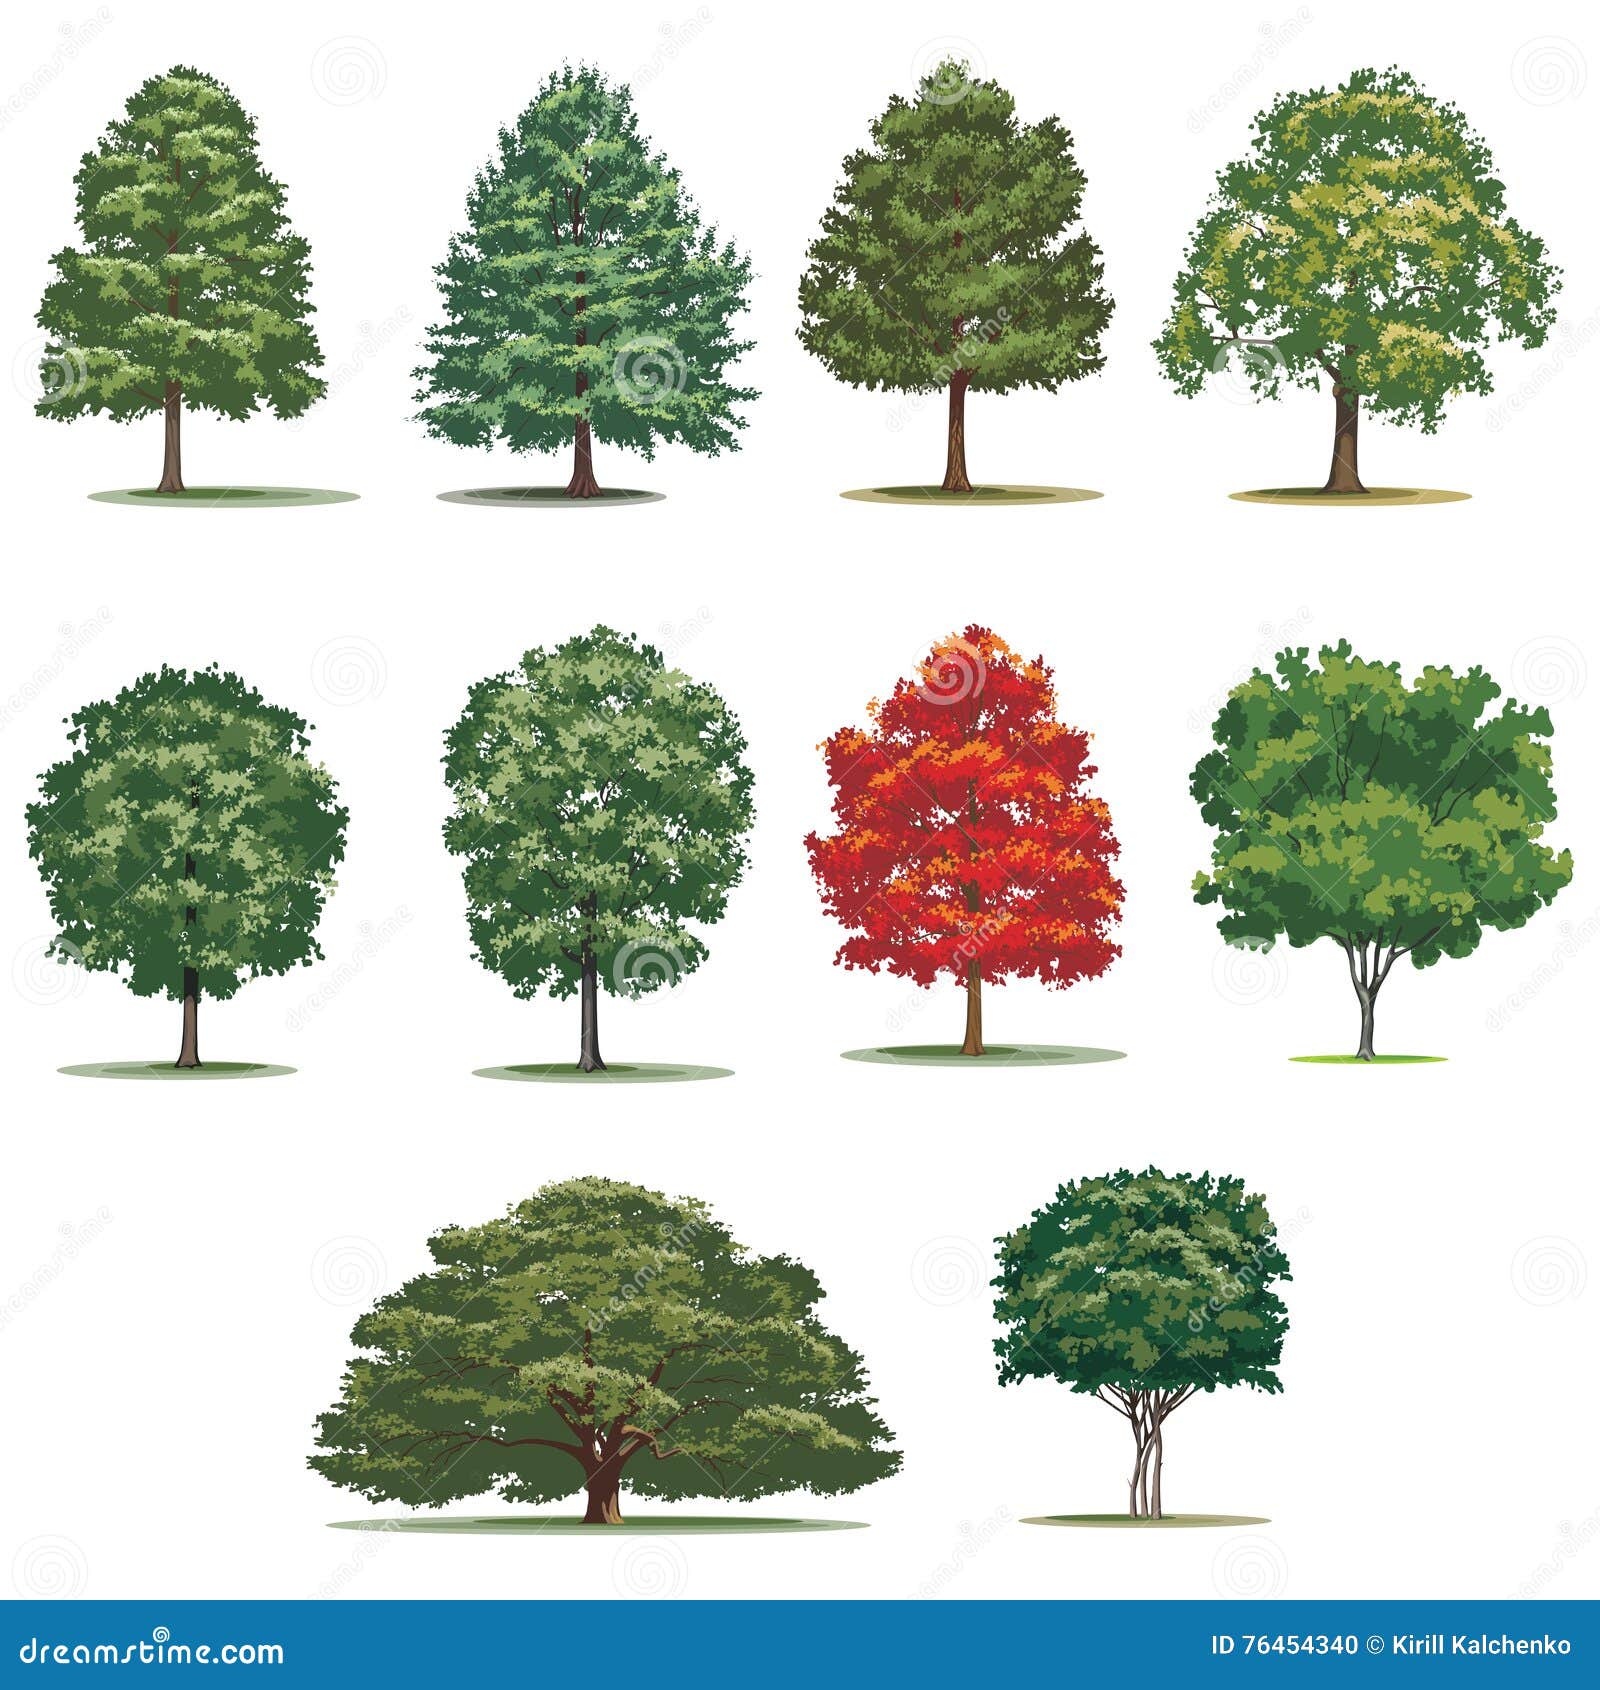 realistic trees pack.   trees on white background.